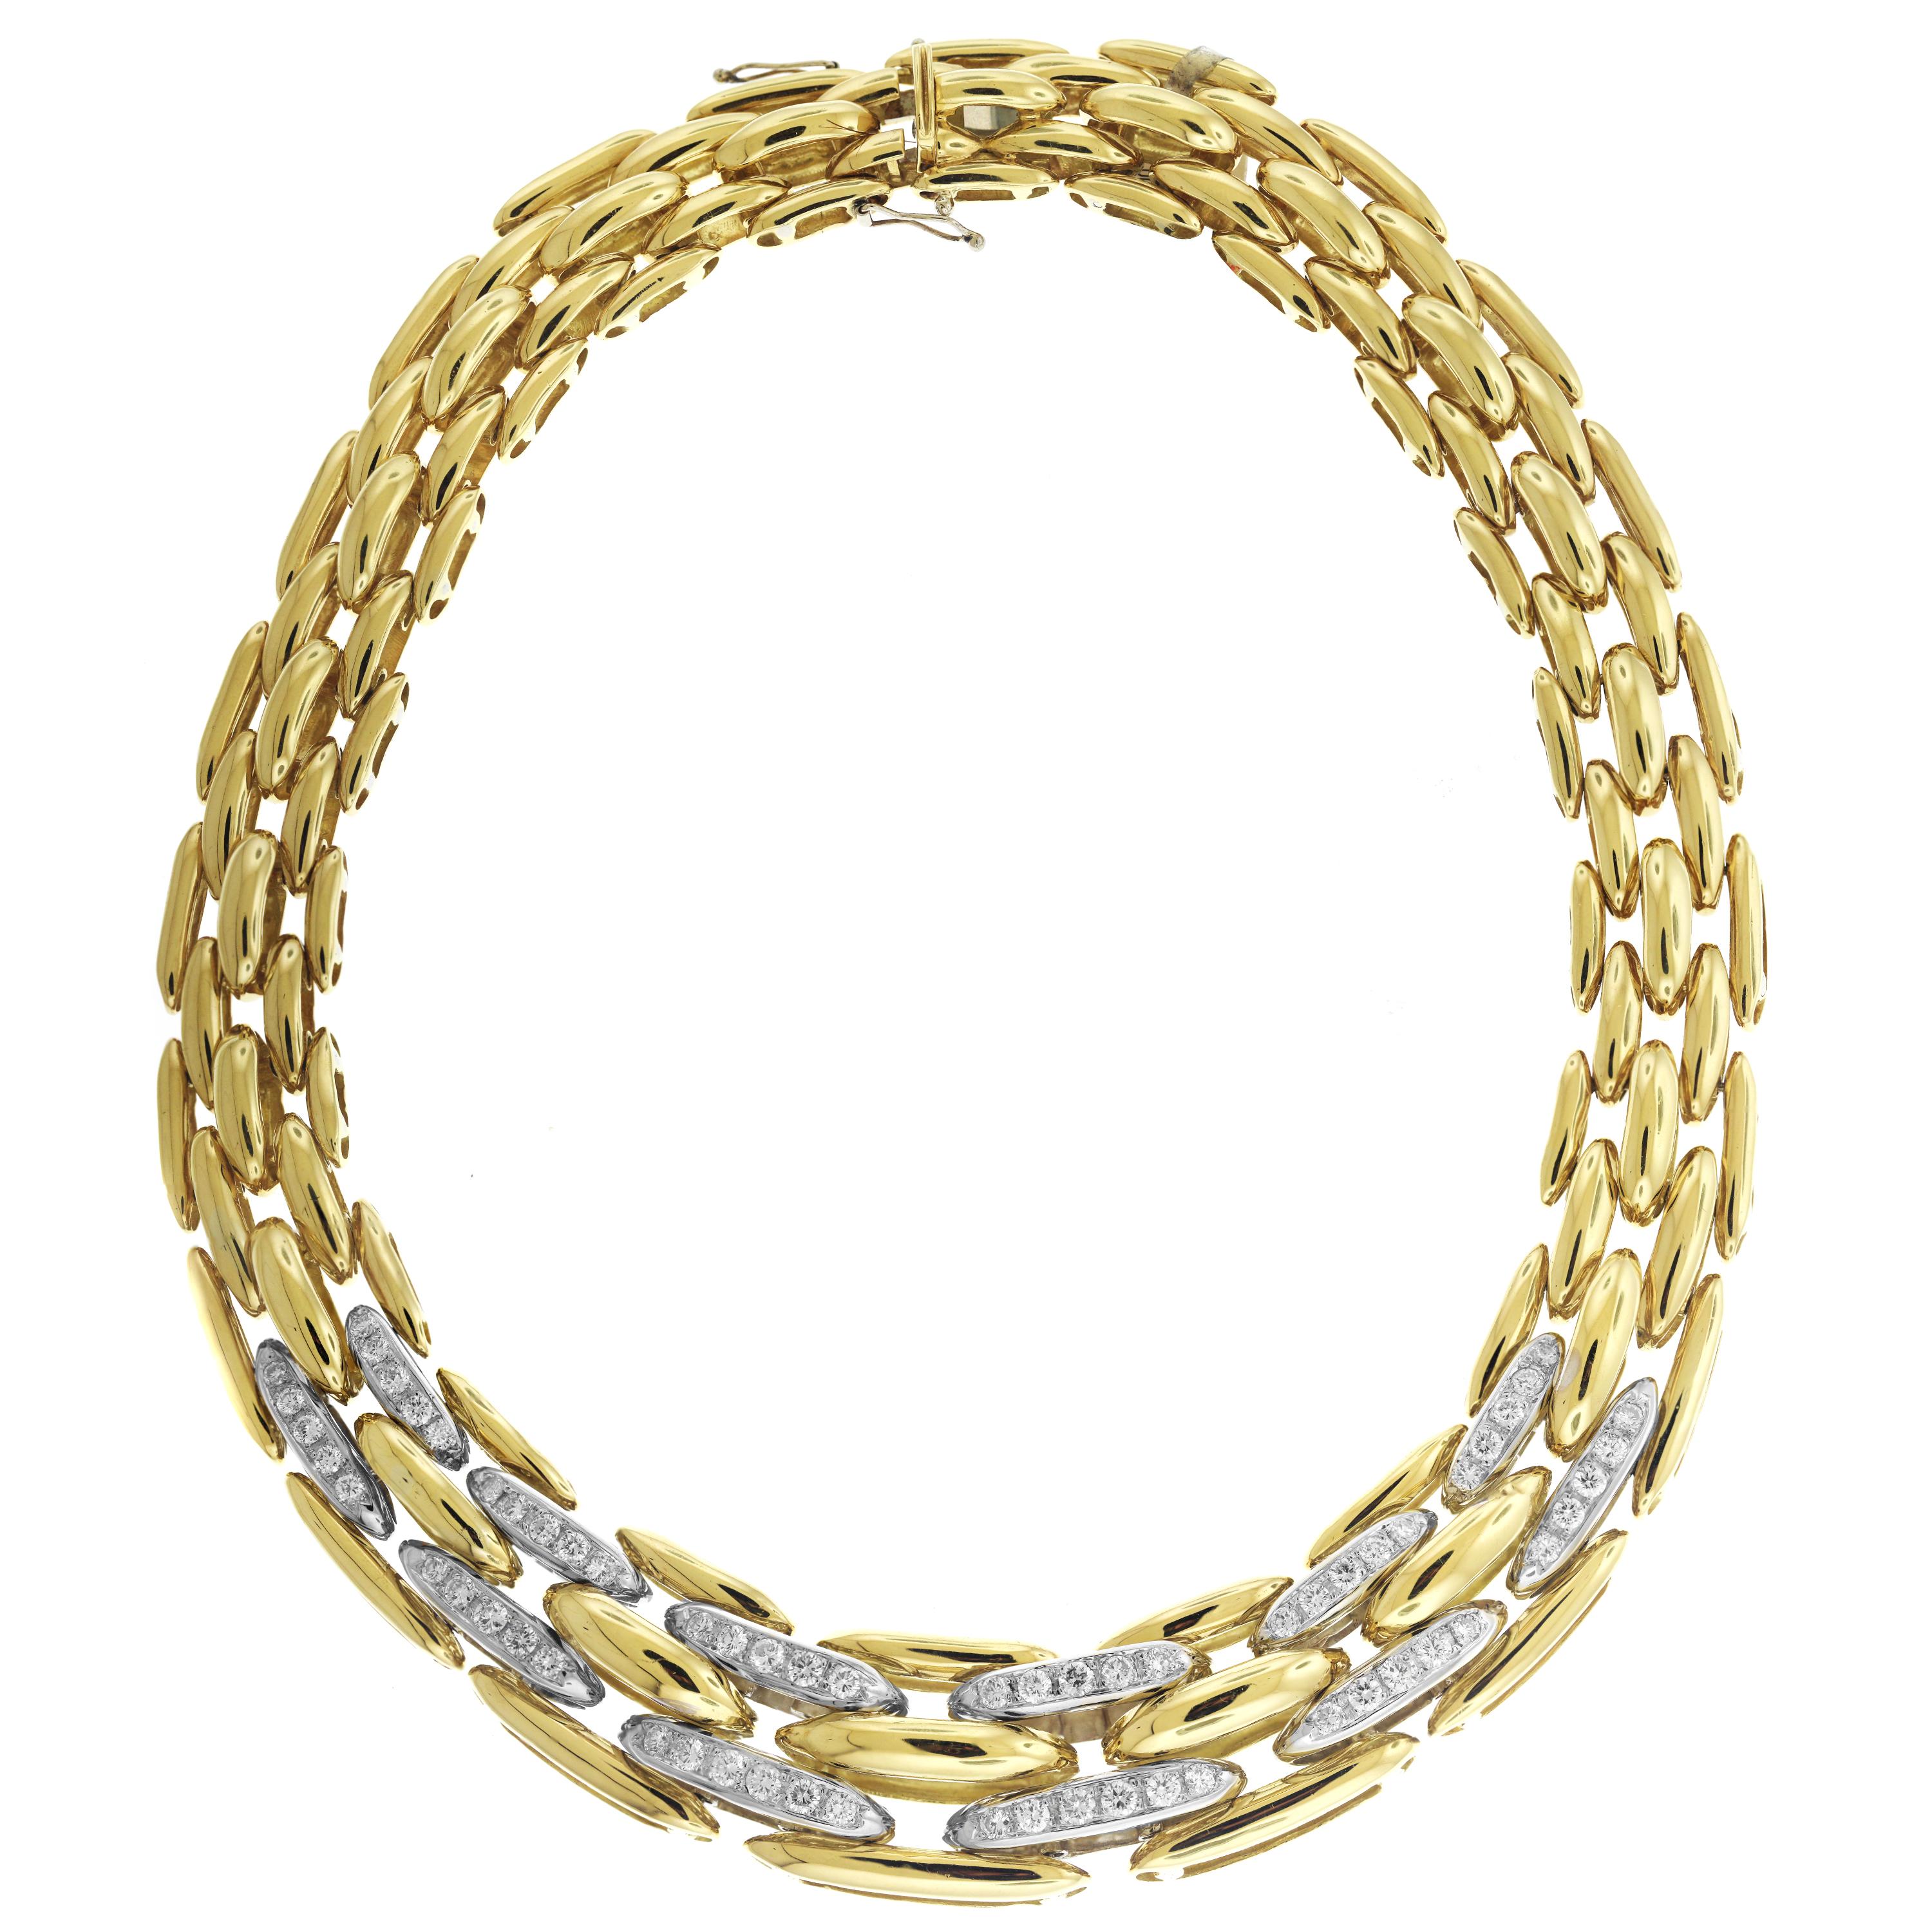 Women's Yellow Gold and Diamond Link Chain Necklace